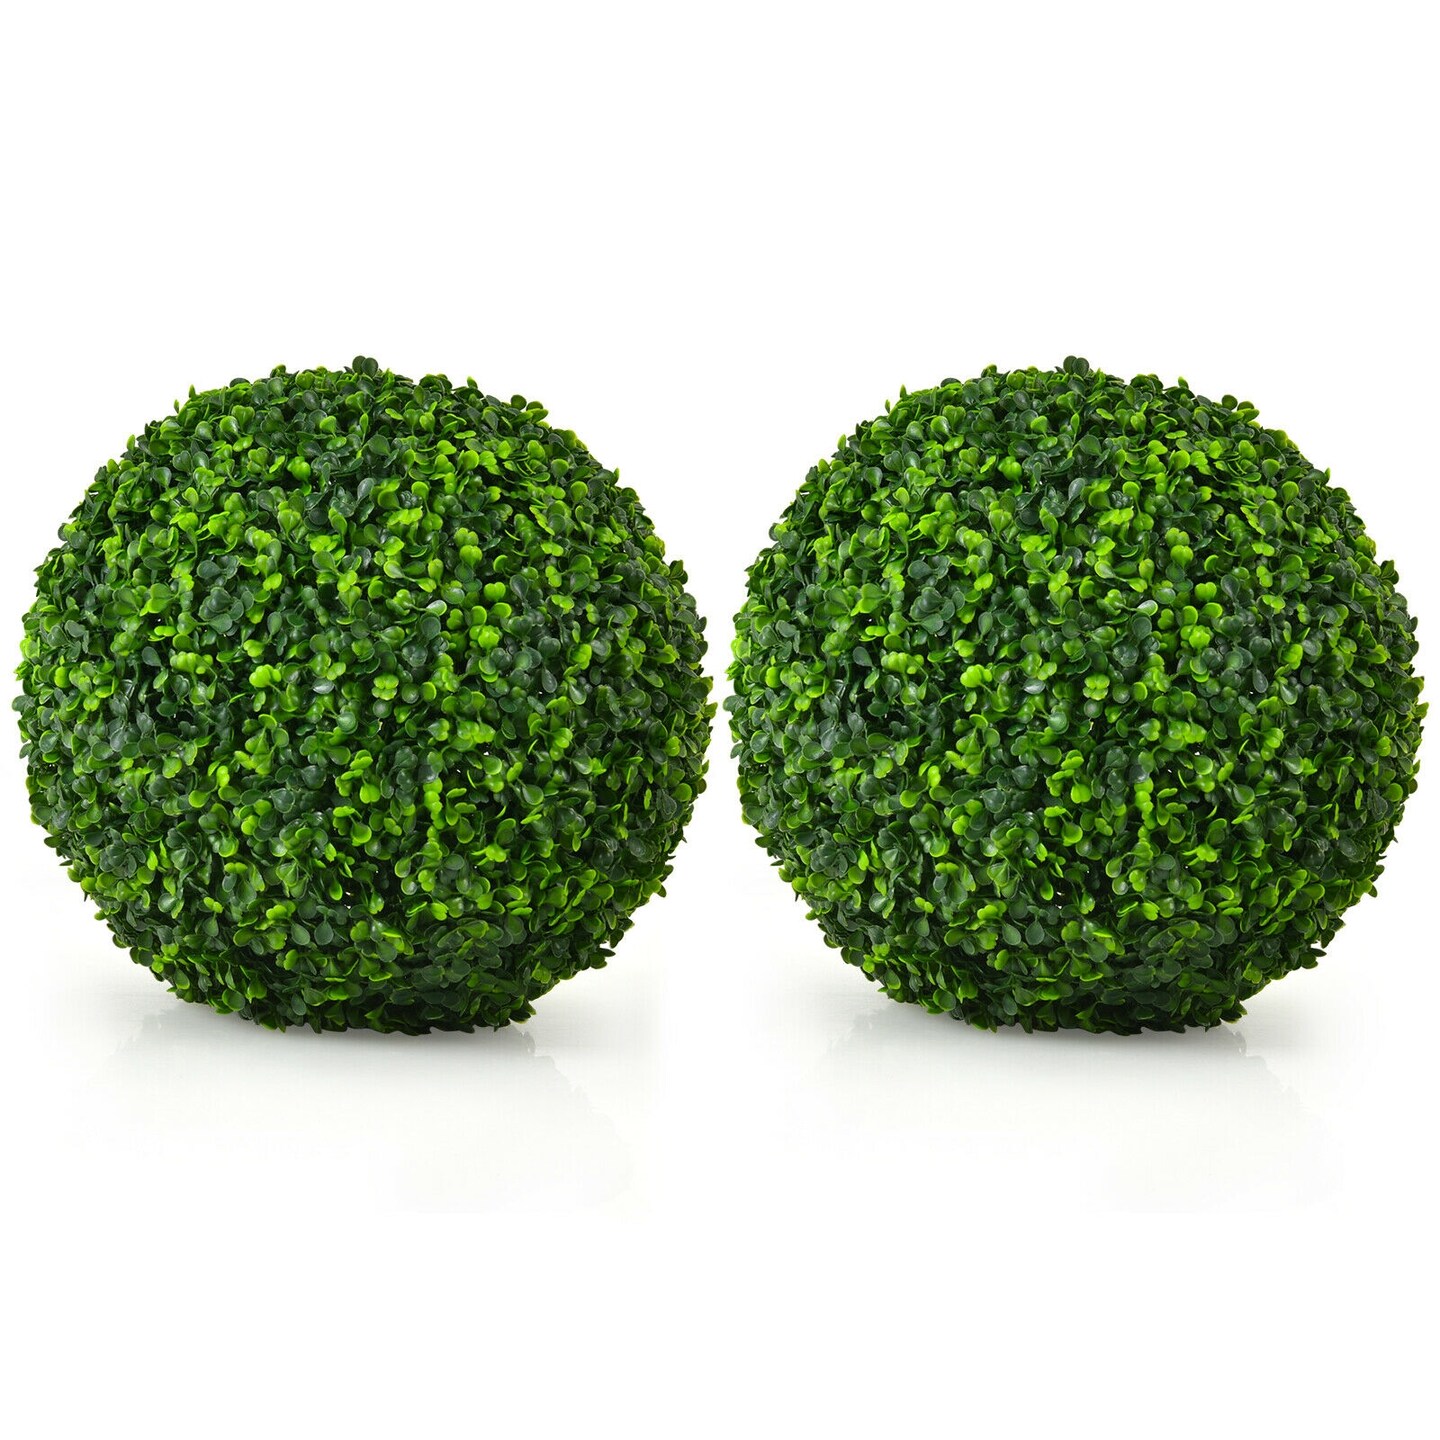 2 Pieces Artificial Boxwood Topiary UV Protected Indoor/Outdoor Balls